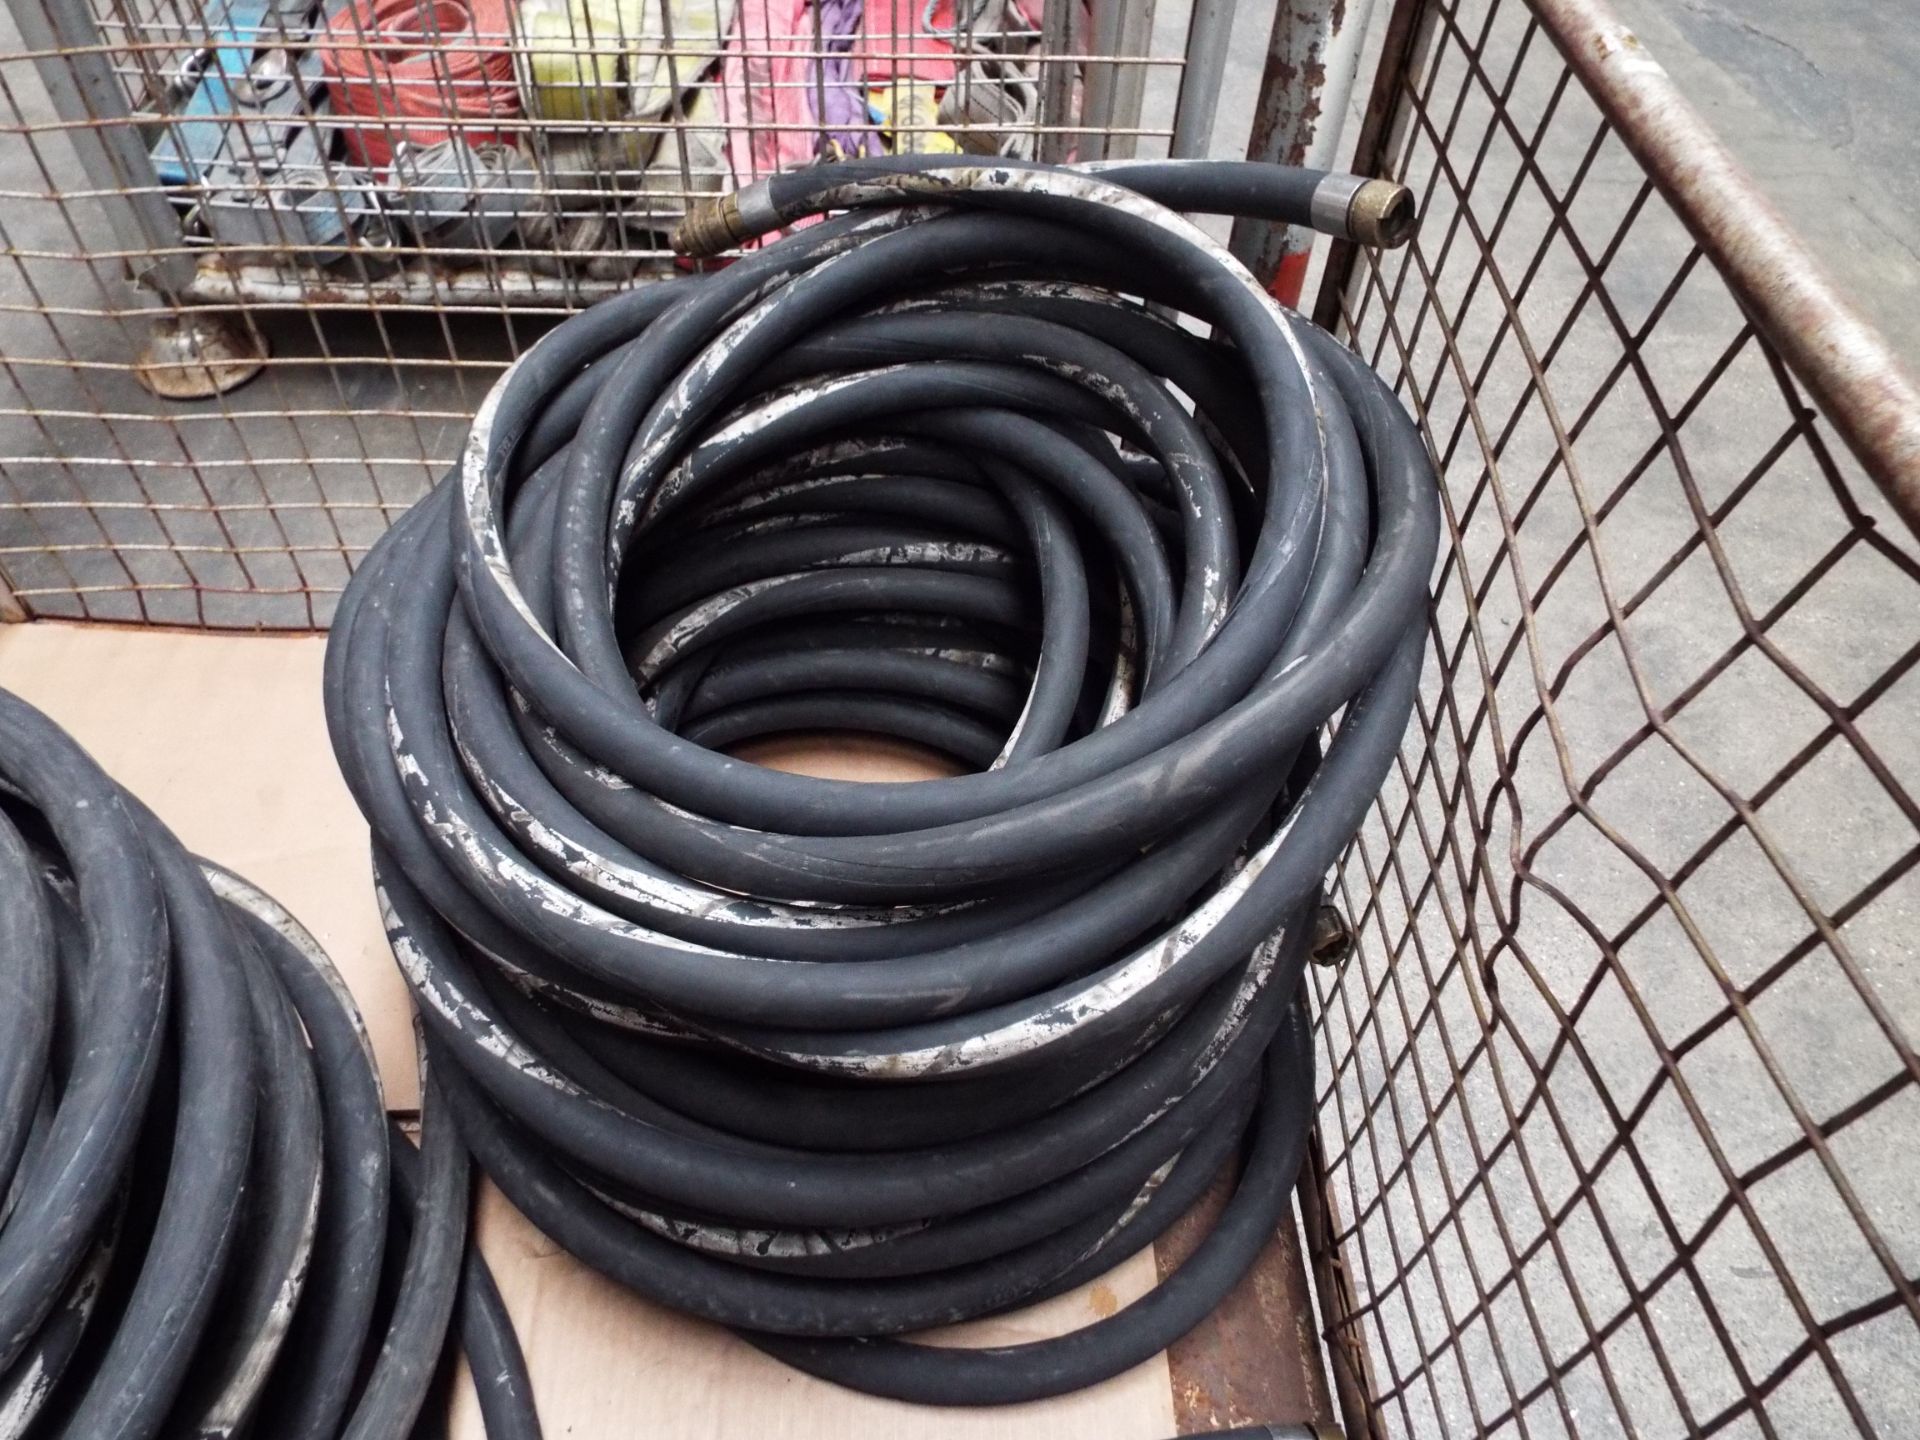 6 x Heavy Duty Fire Hoses with Couplings - Image 2 of 5